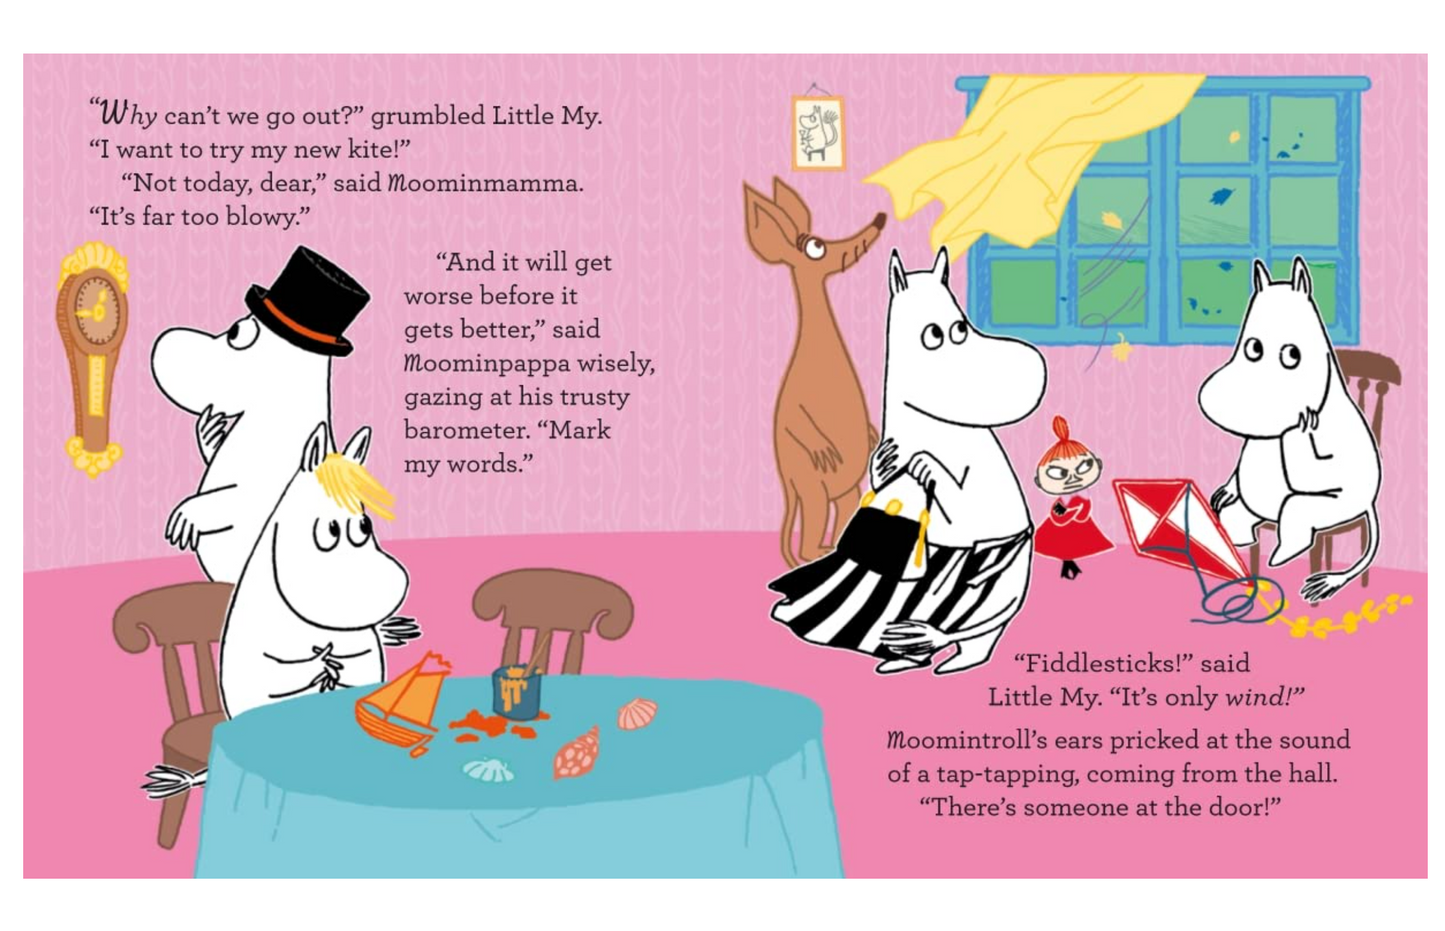 Moomin Little My and the Wild Wind (8847255863583)